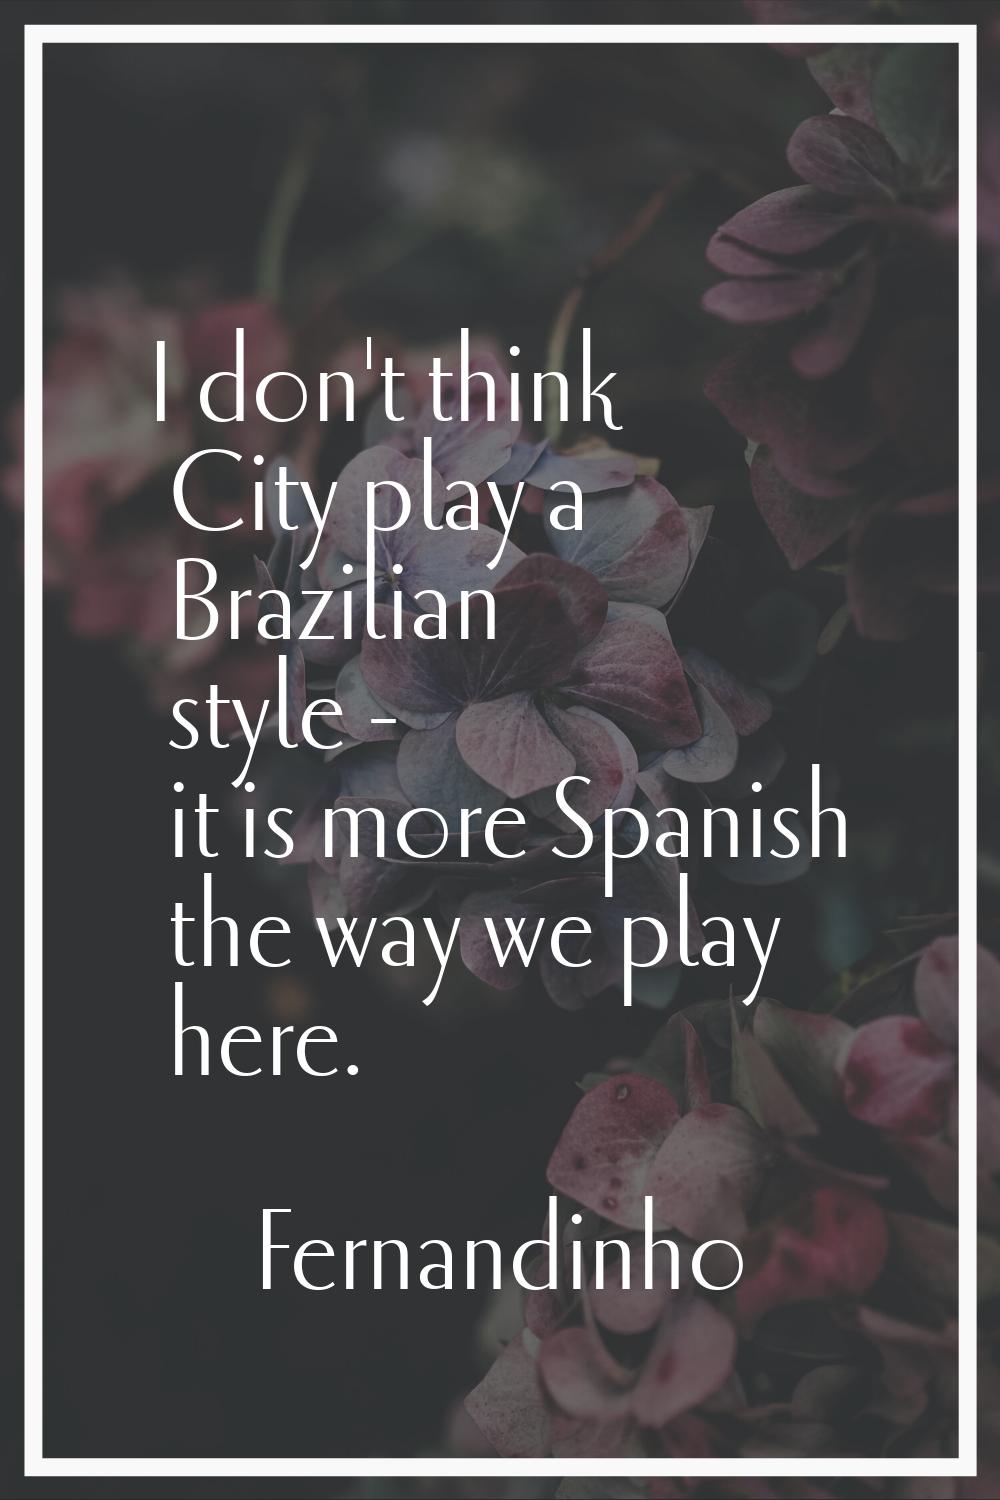 I don't think City play a Brazilian style - it is more Spanish the way we play here.